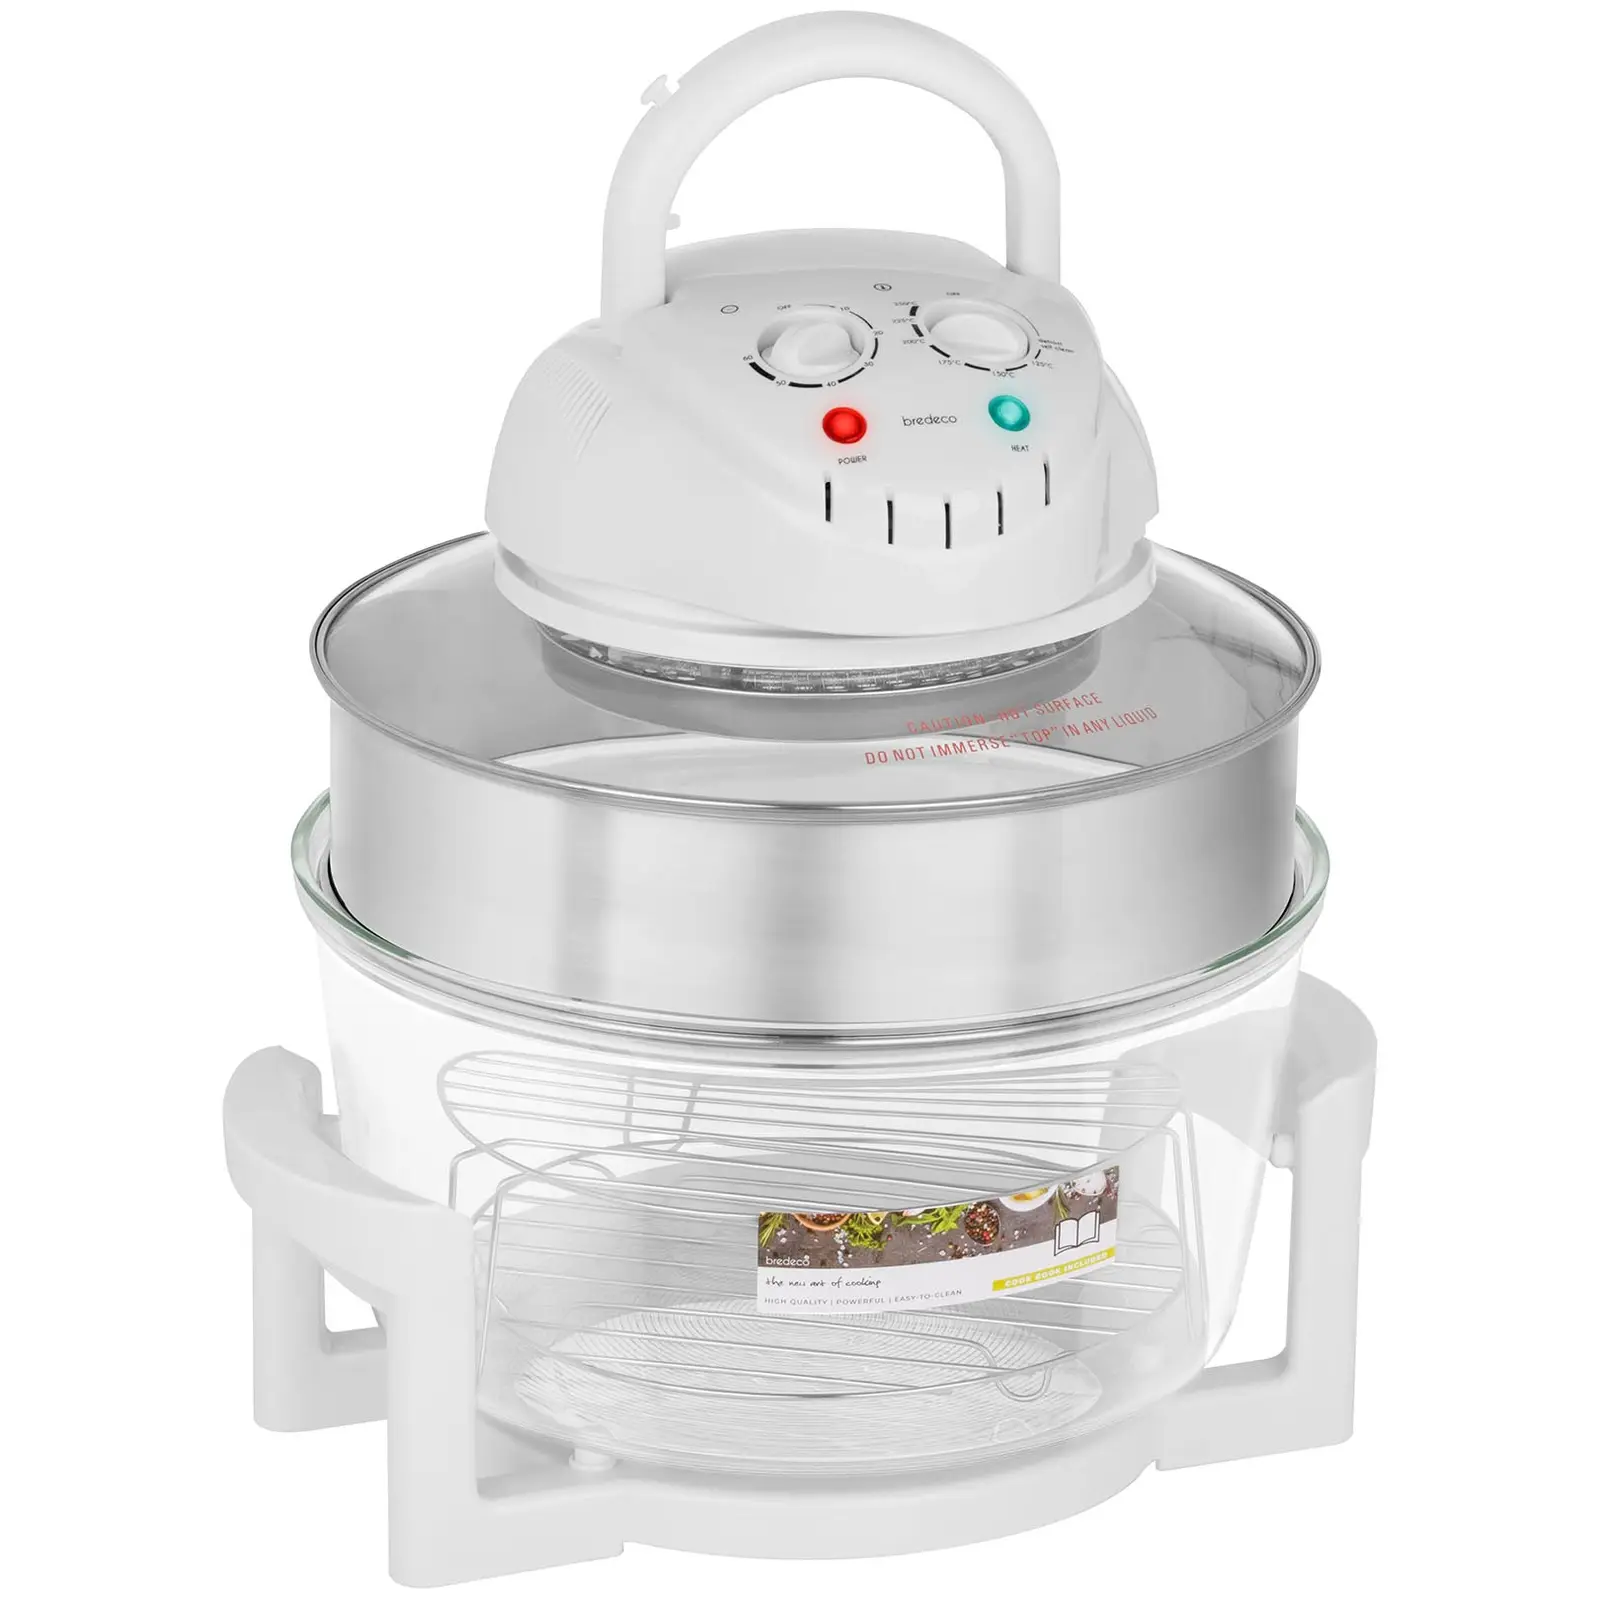 Halogen Oven Cooker with Extender Ring - 250 °C - 60 min